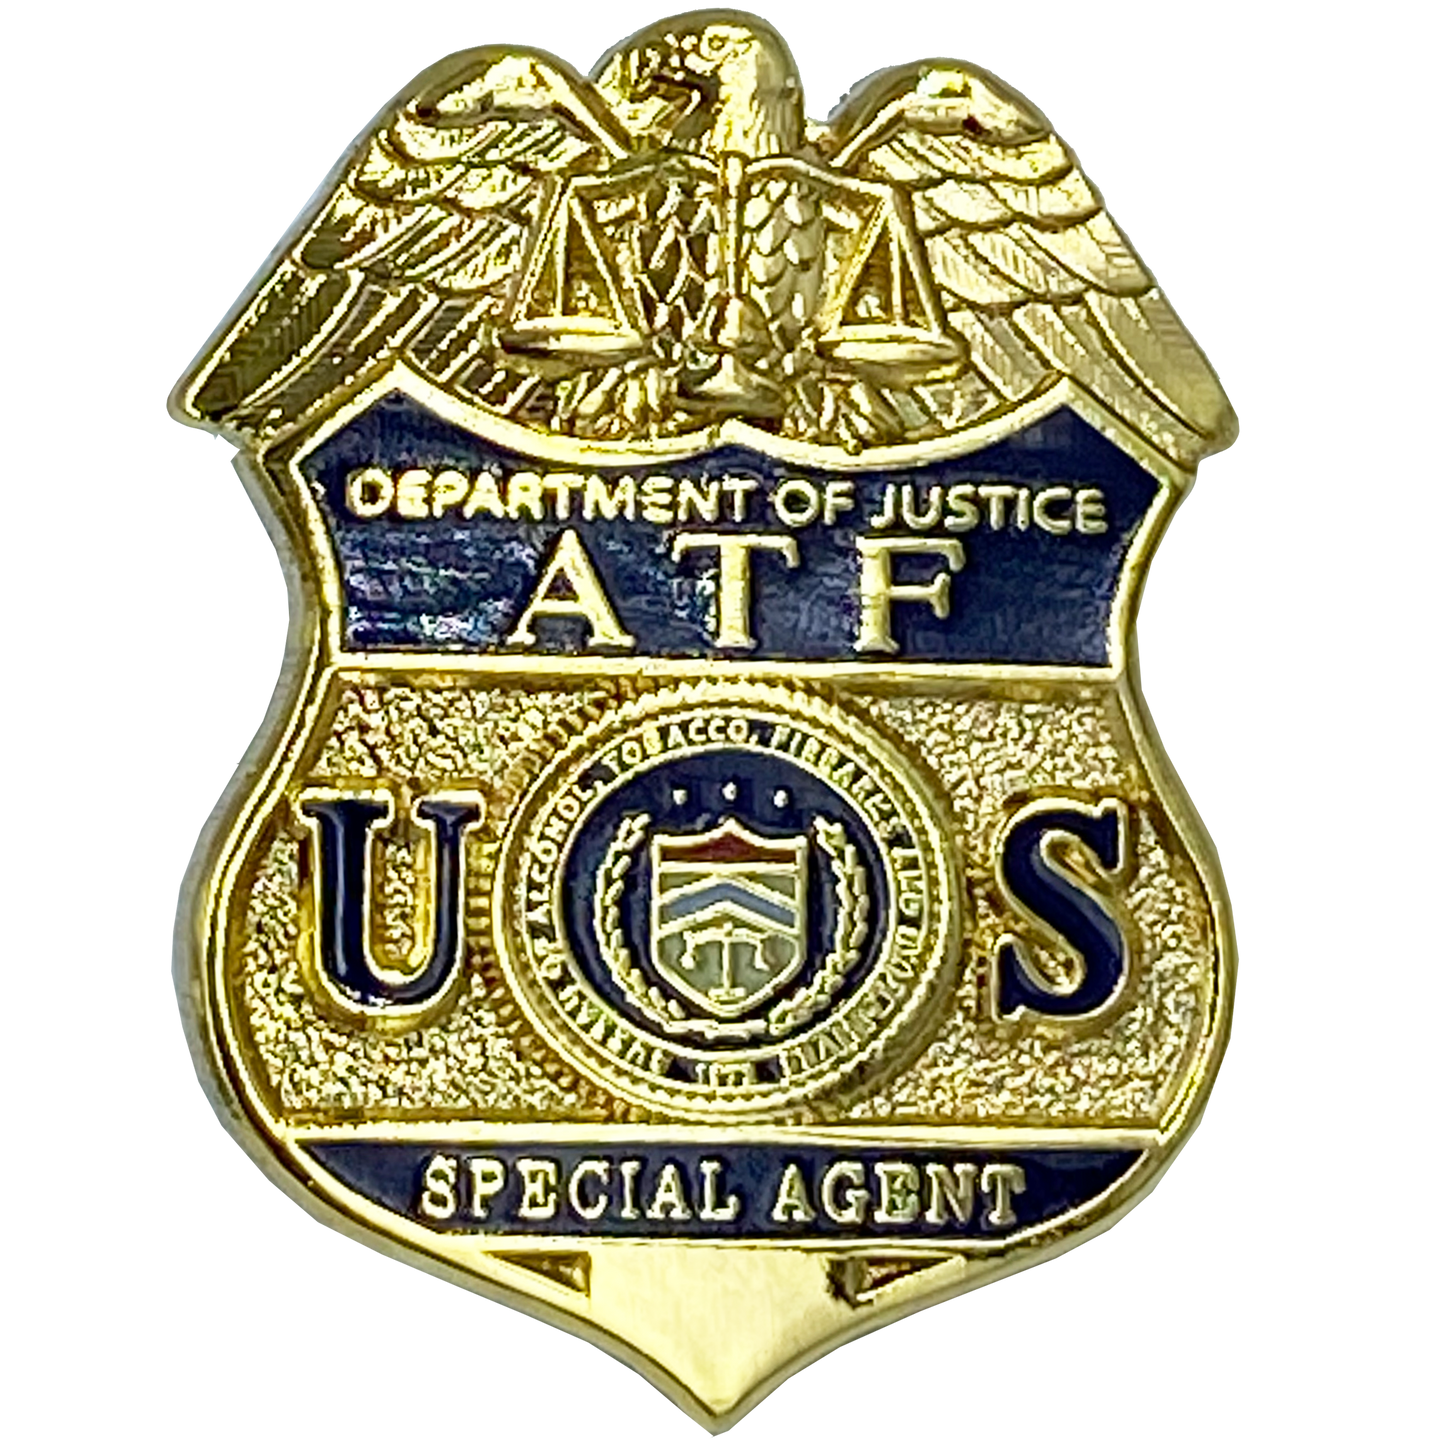 CL-009 ATF Special Agent Pin with deluxe spring loaded clasp